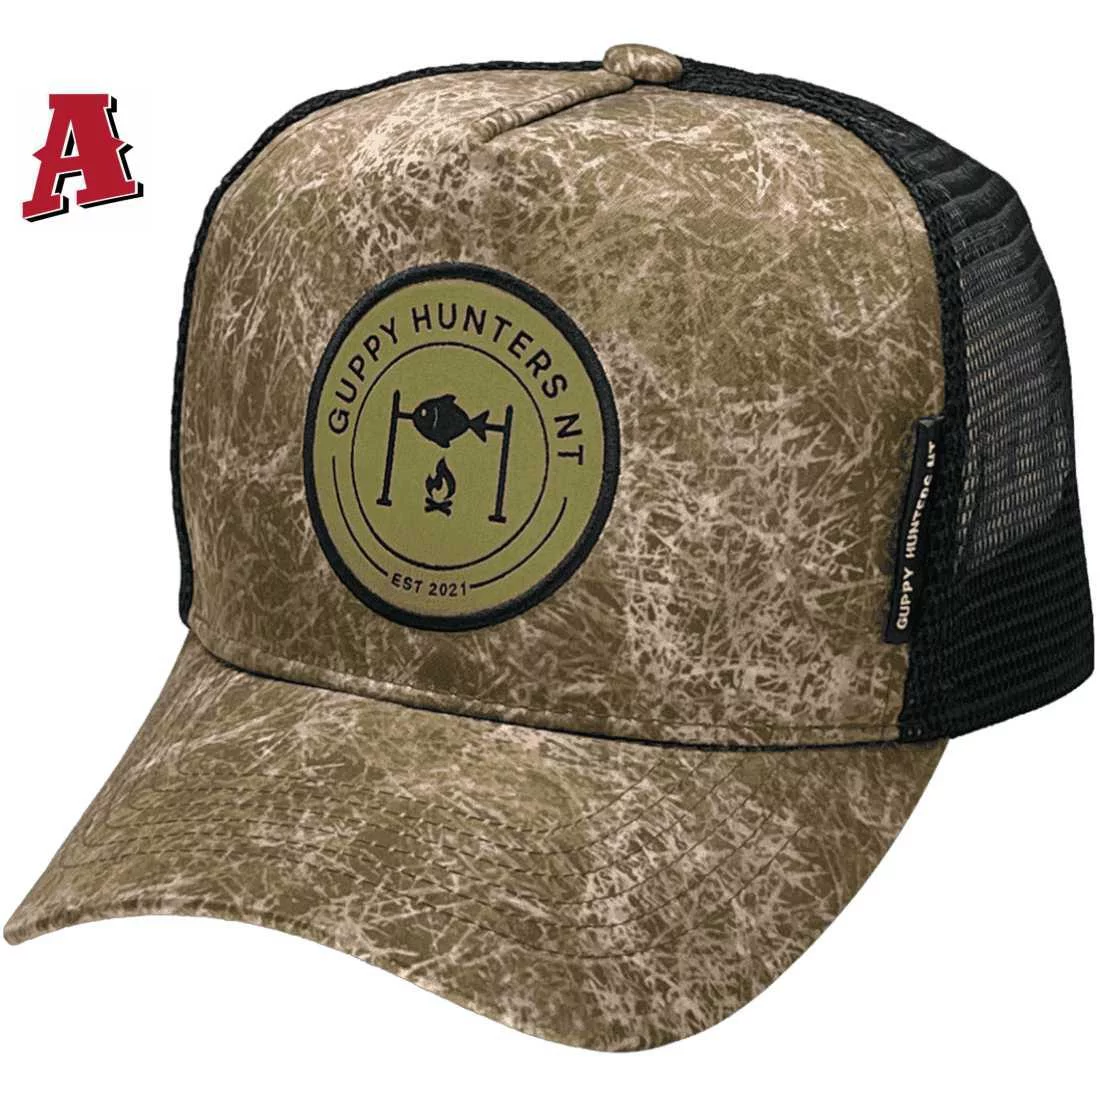 Guppy Hunters NT HP Midrange Aussie Trucker Hats with Australian Head Fit Crown with Substrate Scrubgrass Camo